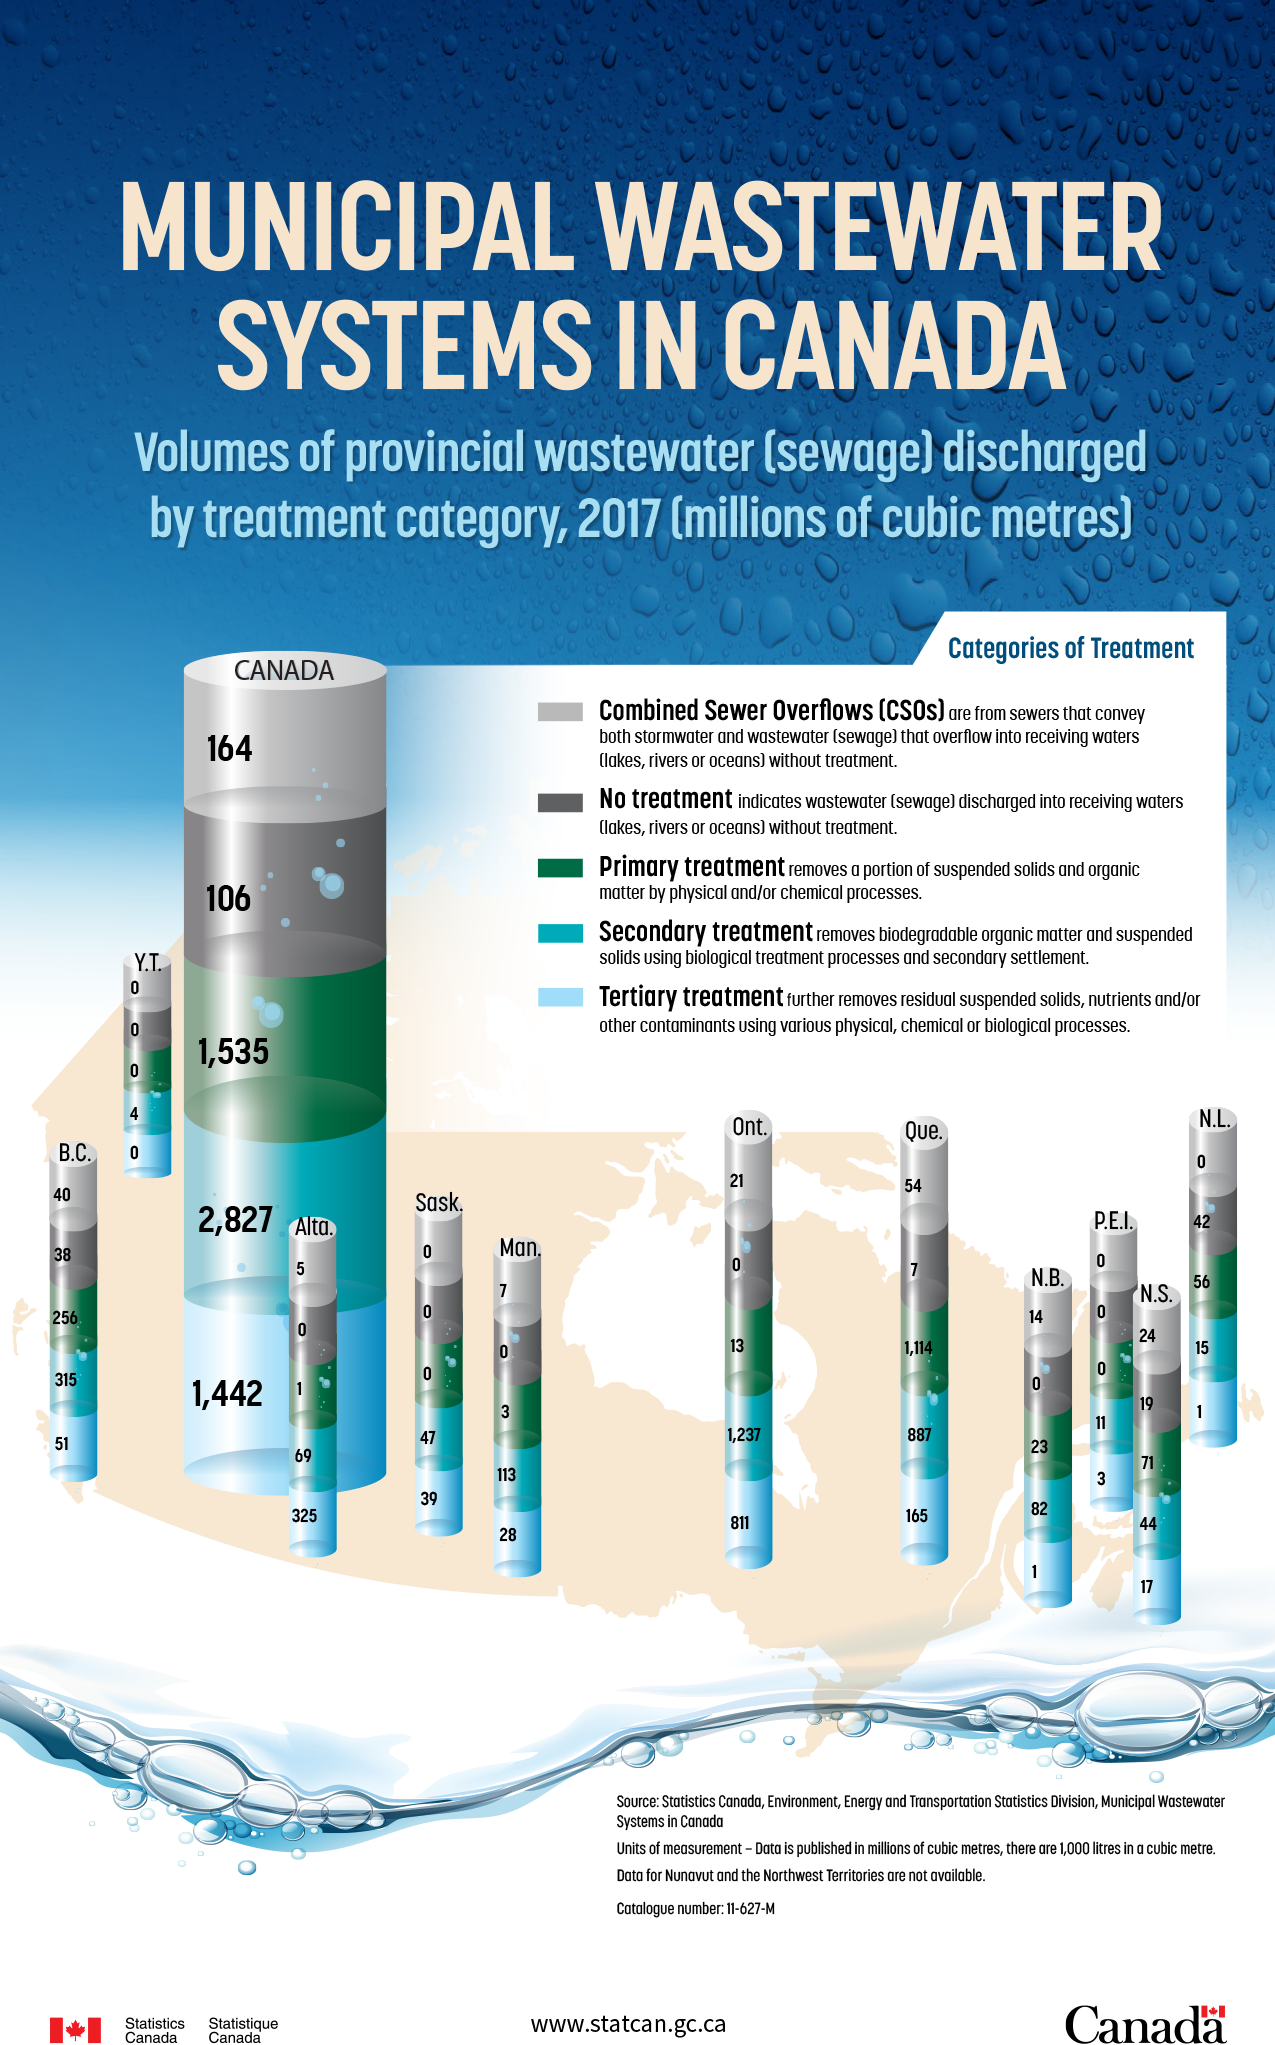 Thumbnail for Infographic 1: Municipal Wastewater Systems in Canada